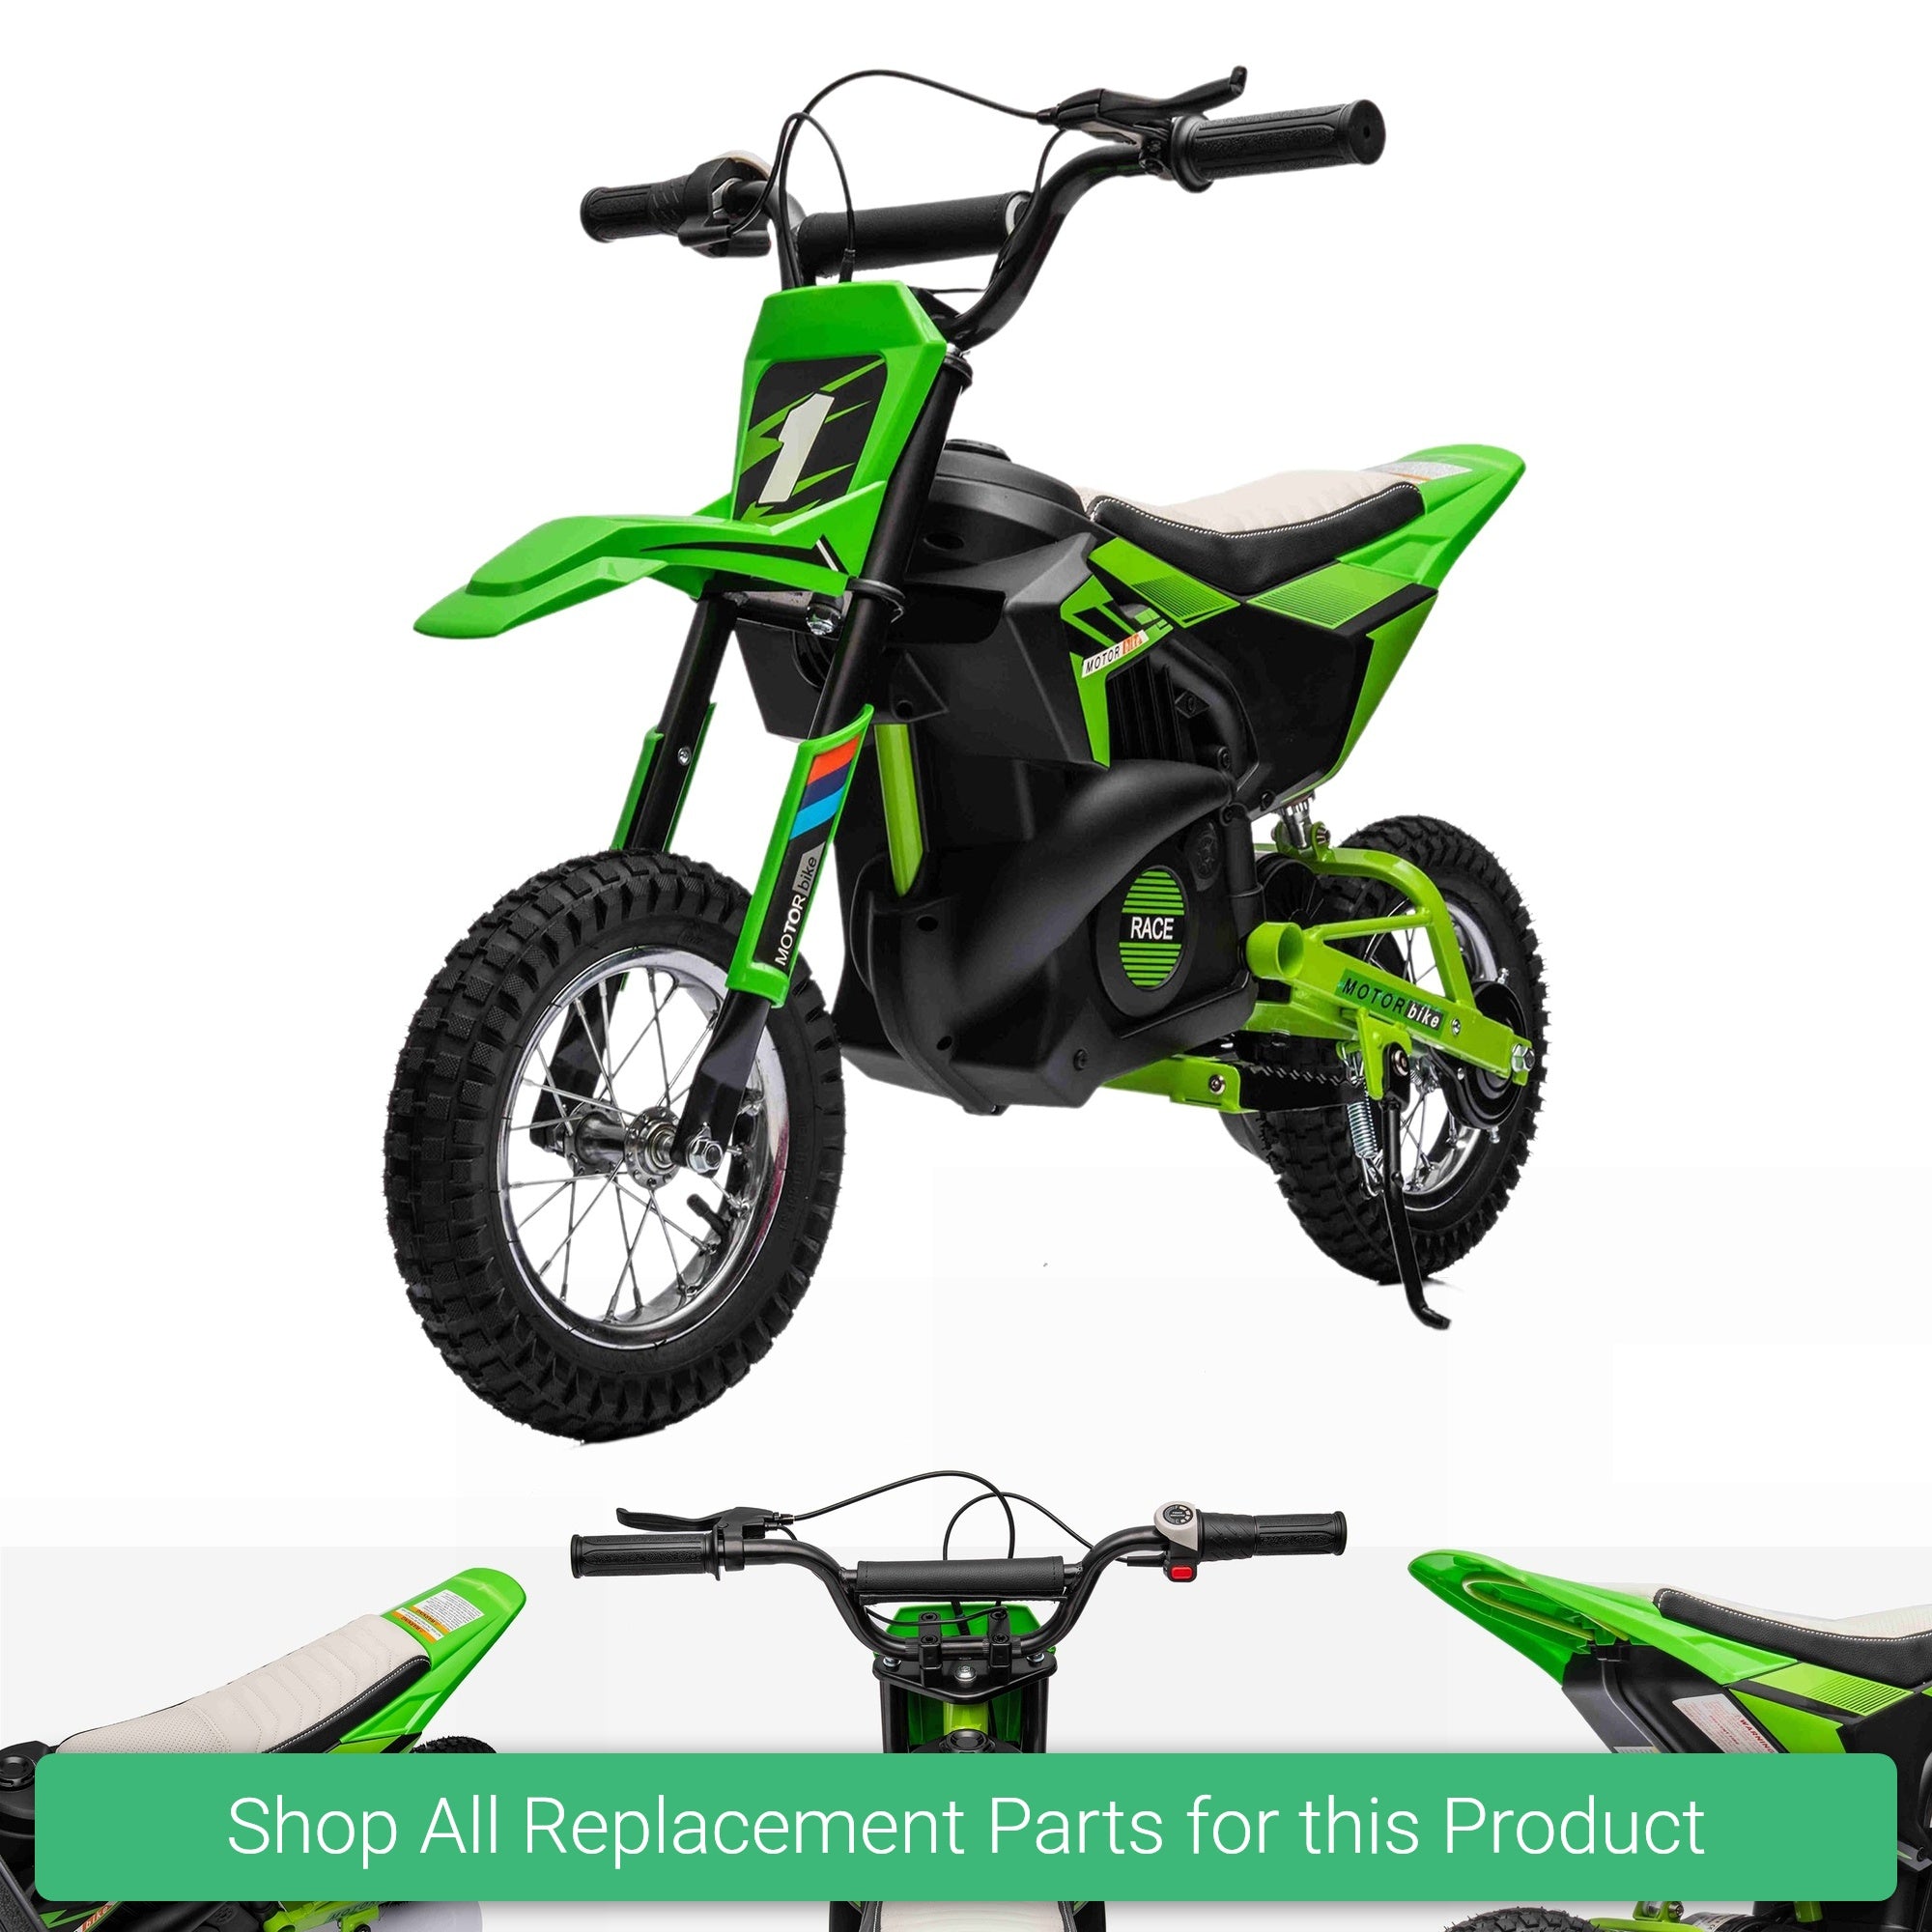 Replacement Parts and Spares for Kids 250W Kids Motorbike Dirt Bike - OneMX-250W-VARI - BDM0952